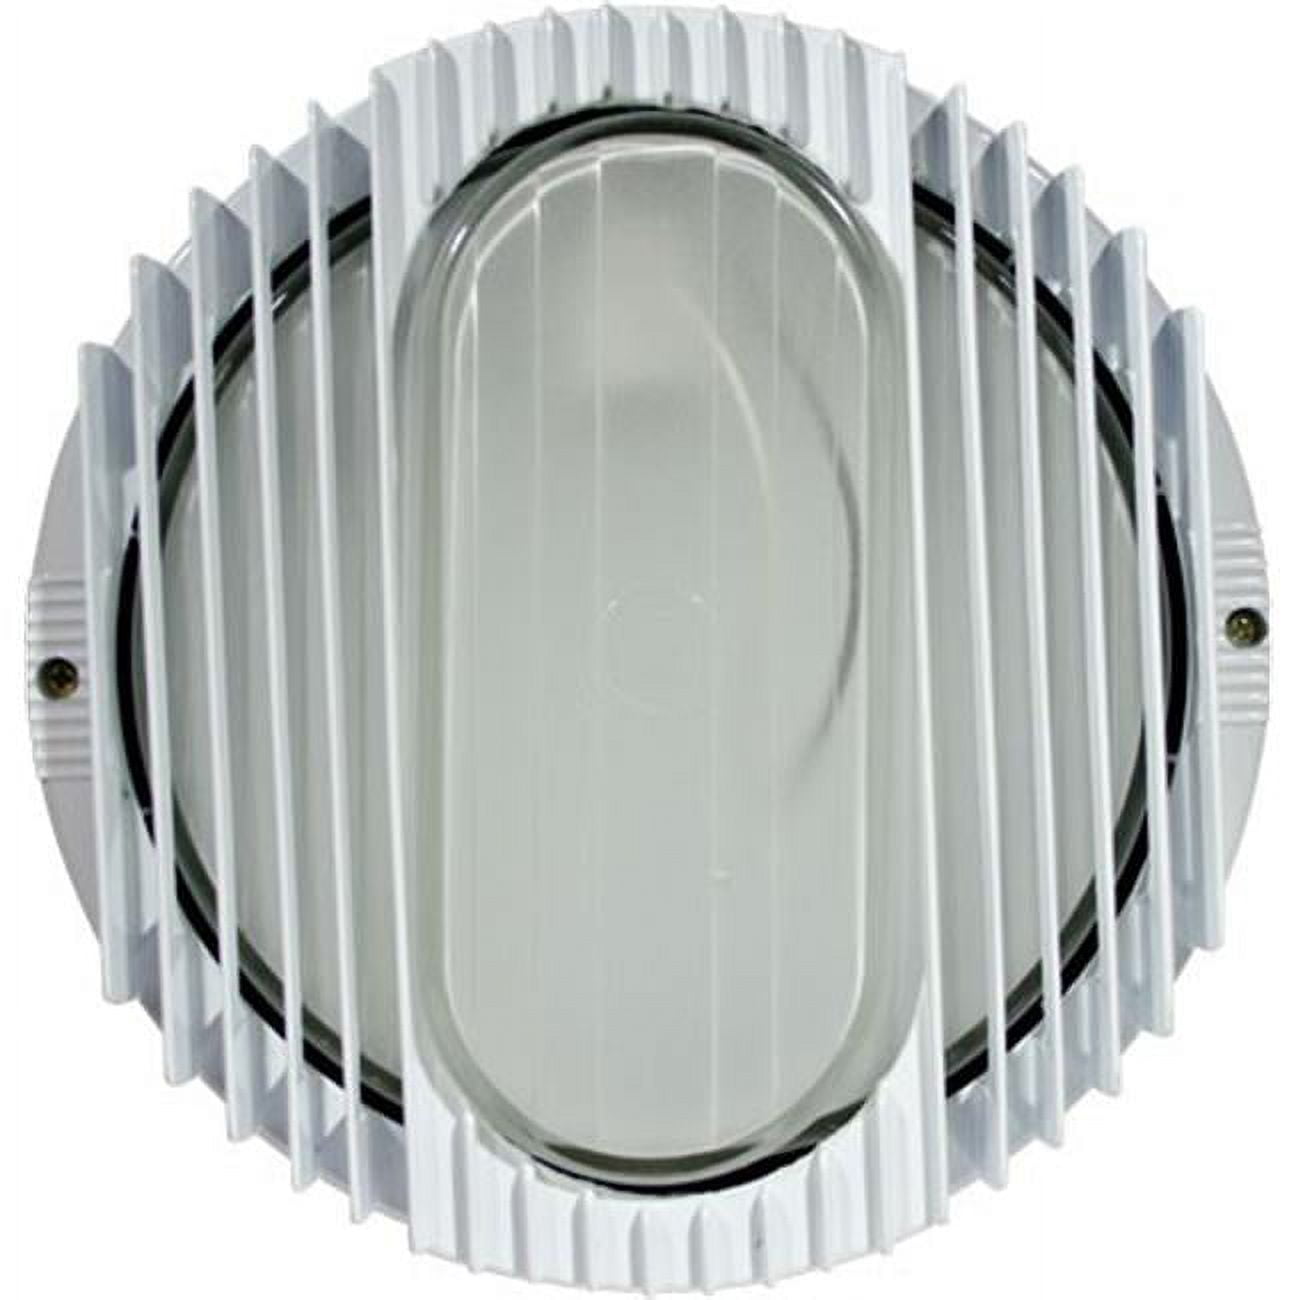 Picture of Dabmar Lighting W3050-LED9-W Cast Aluminum Wall Fixture LED - 9W 85-265V, White